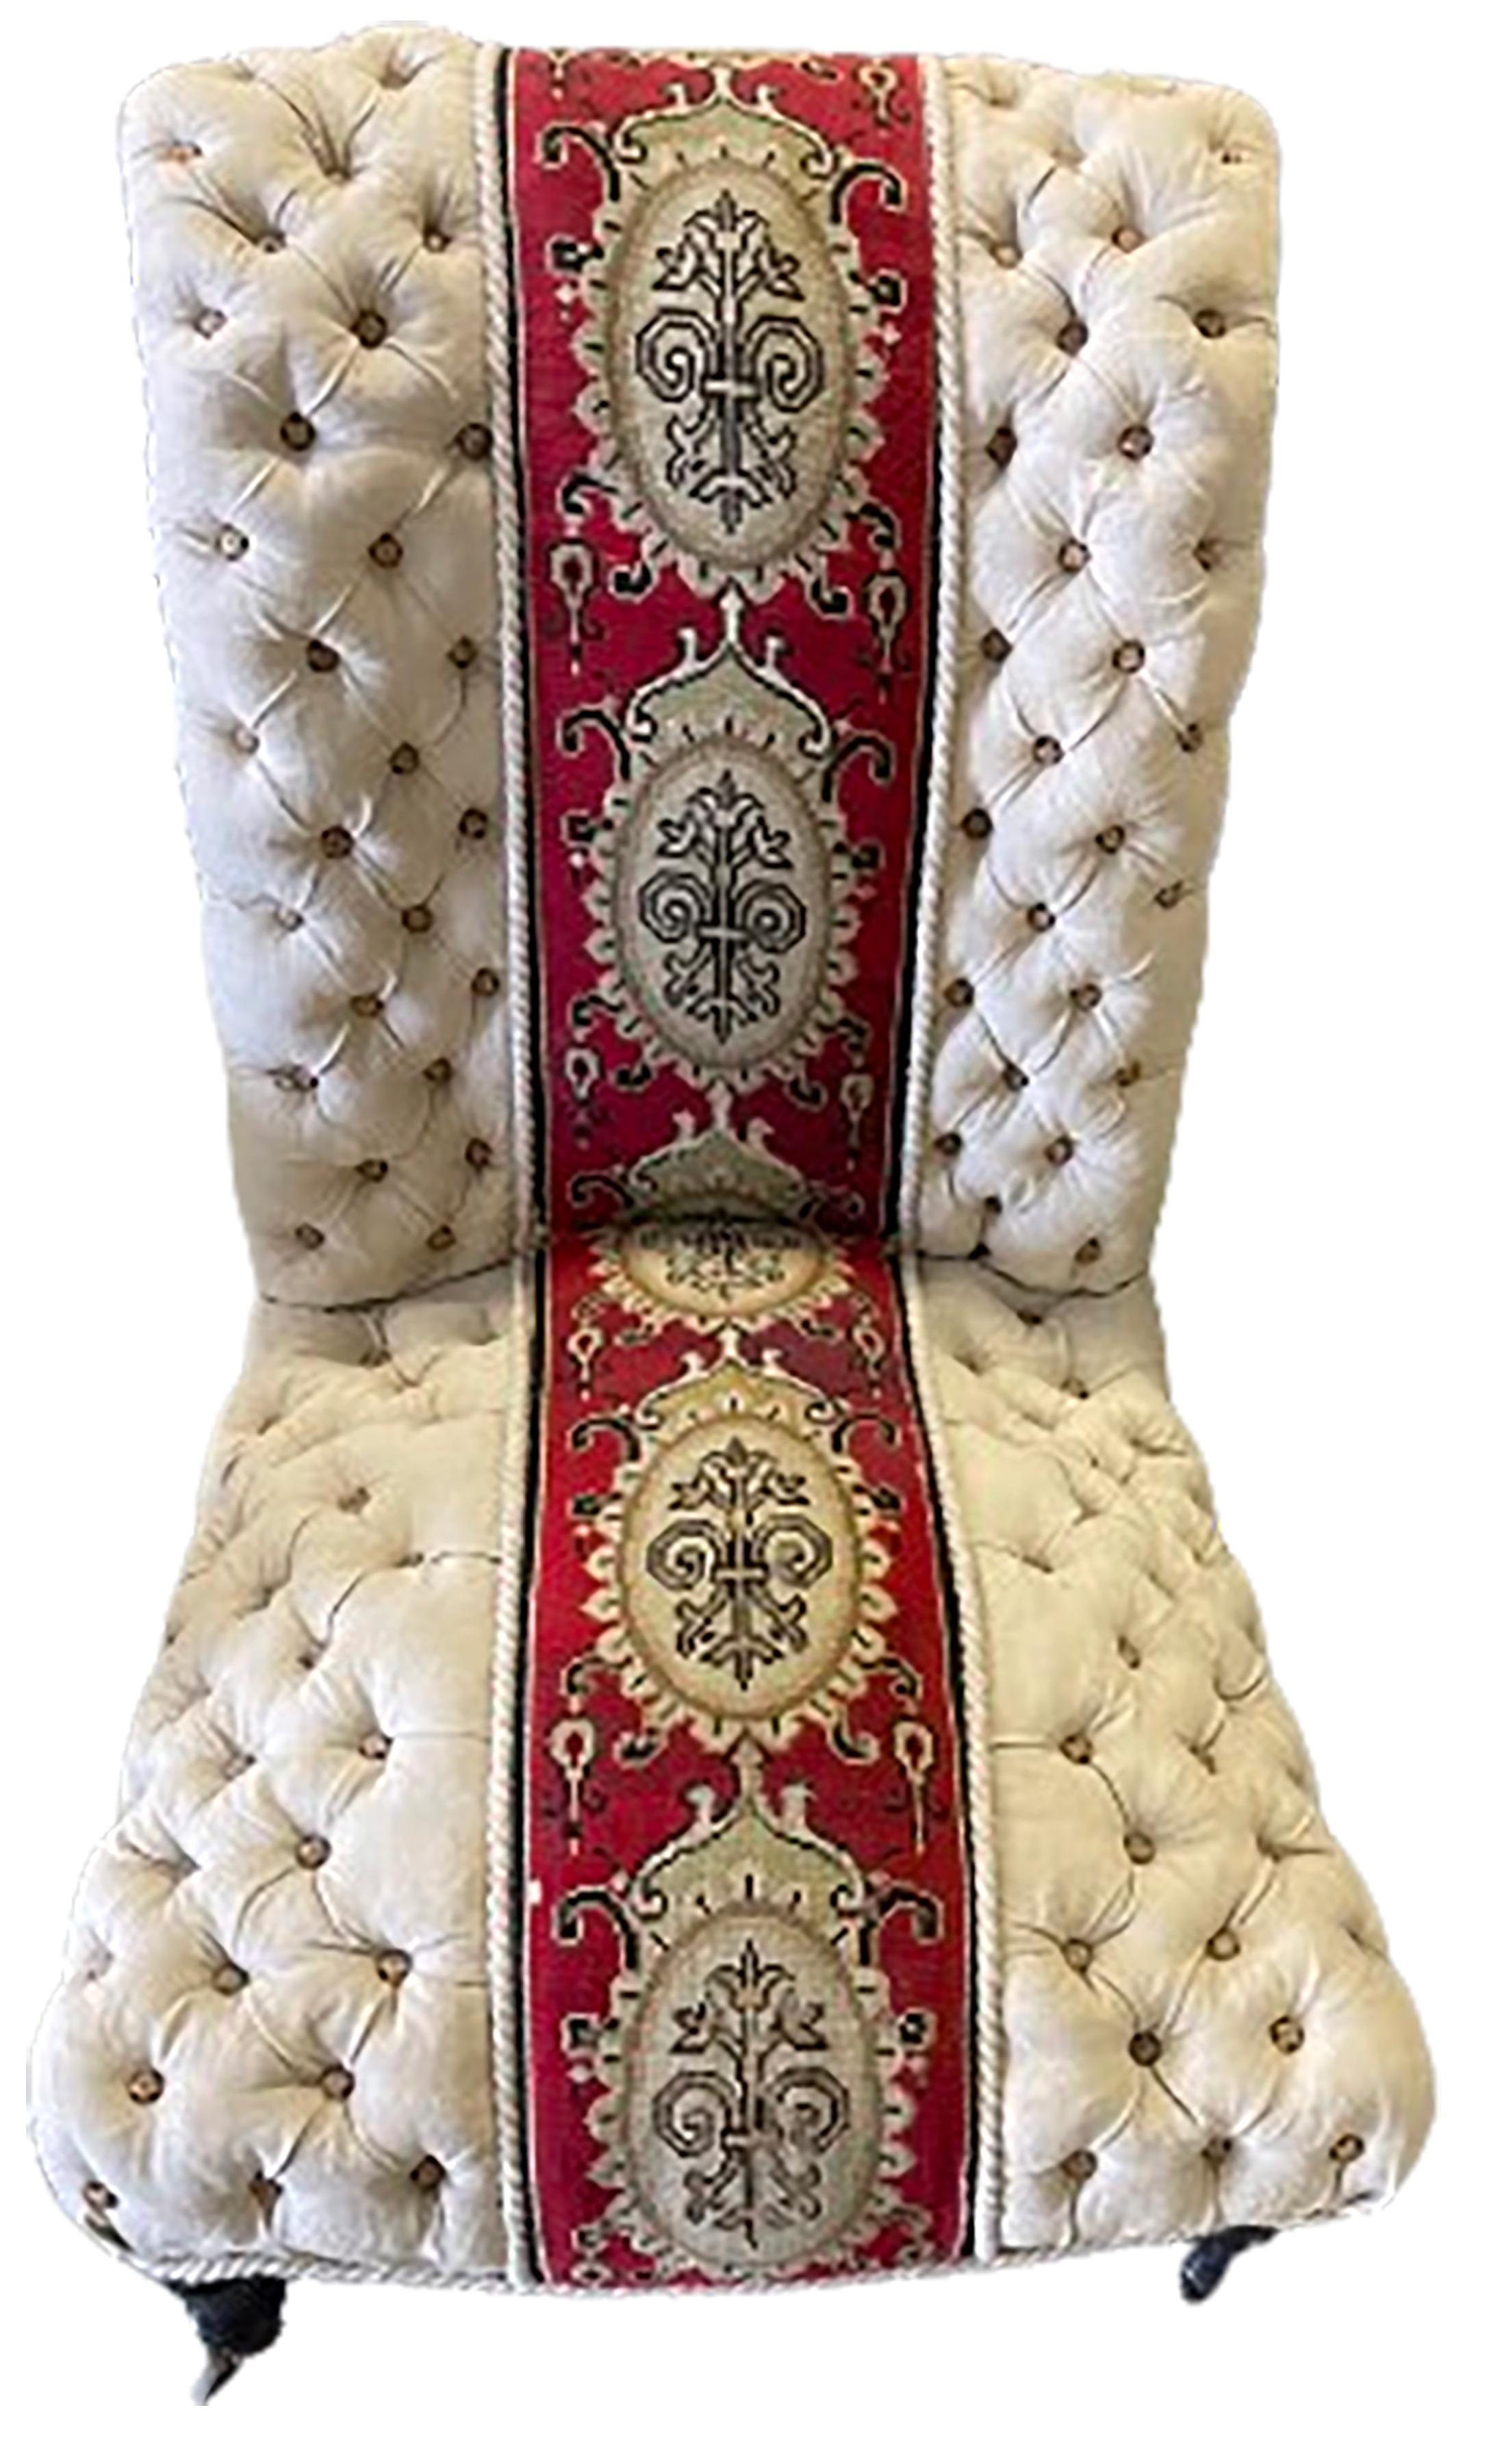 A handsome white tufted Napoleon III occasional slipper chair. Scrolled back with black painted wooden legs.  wheels on the front legs. Crimson red and white ornate needlework panel running from bottom to top. Solid color on the back.

No obvious